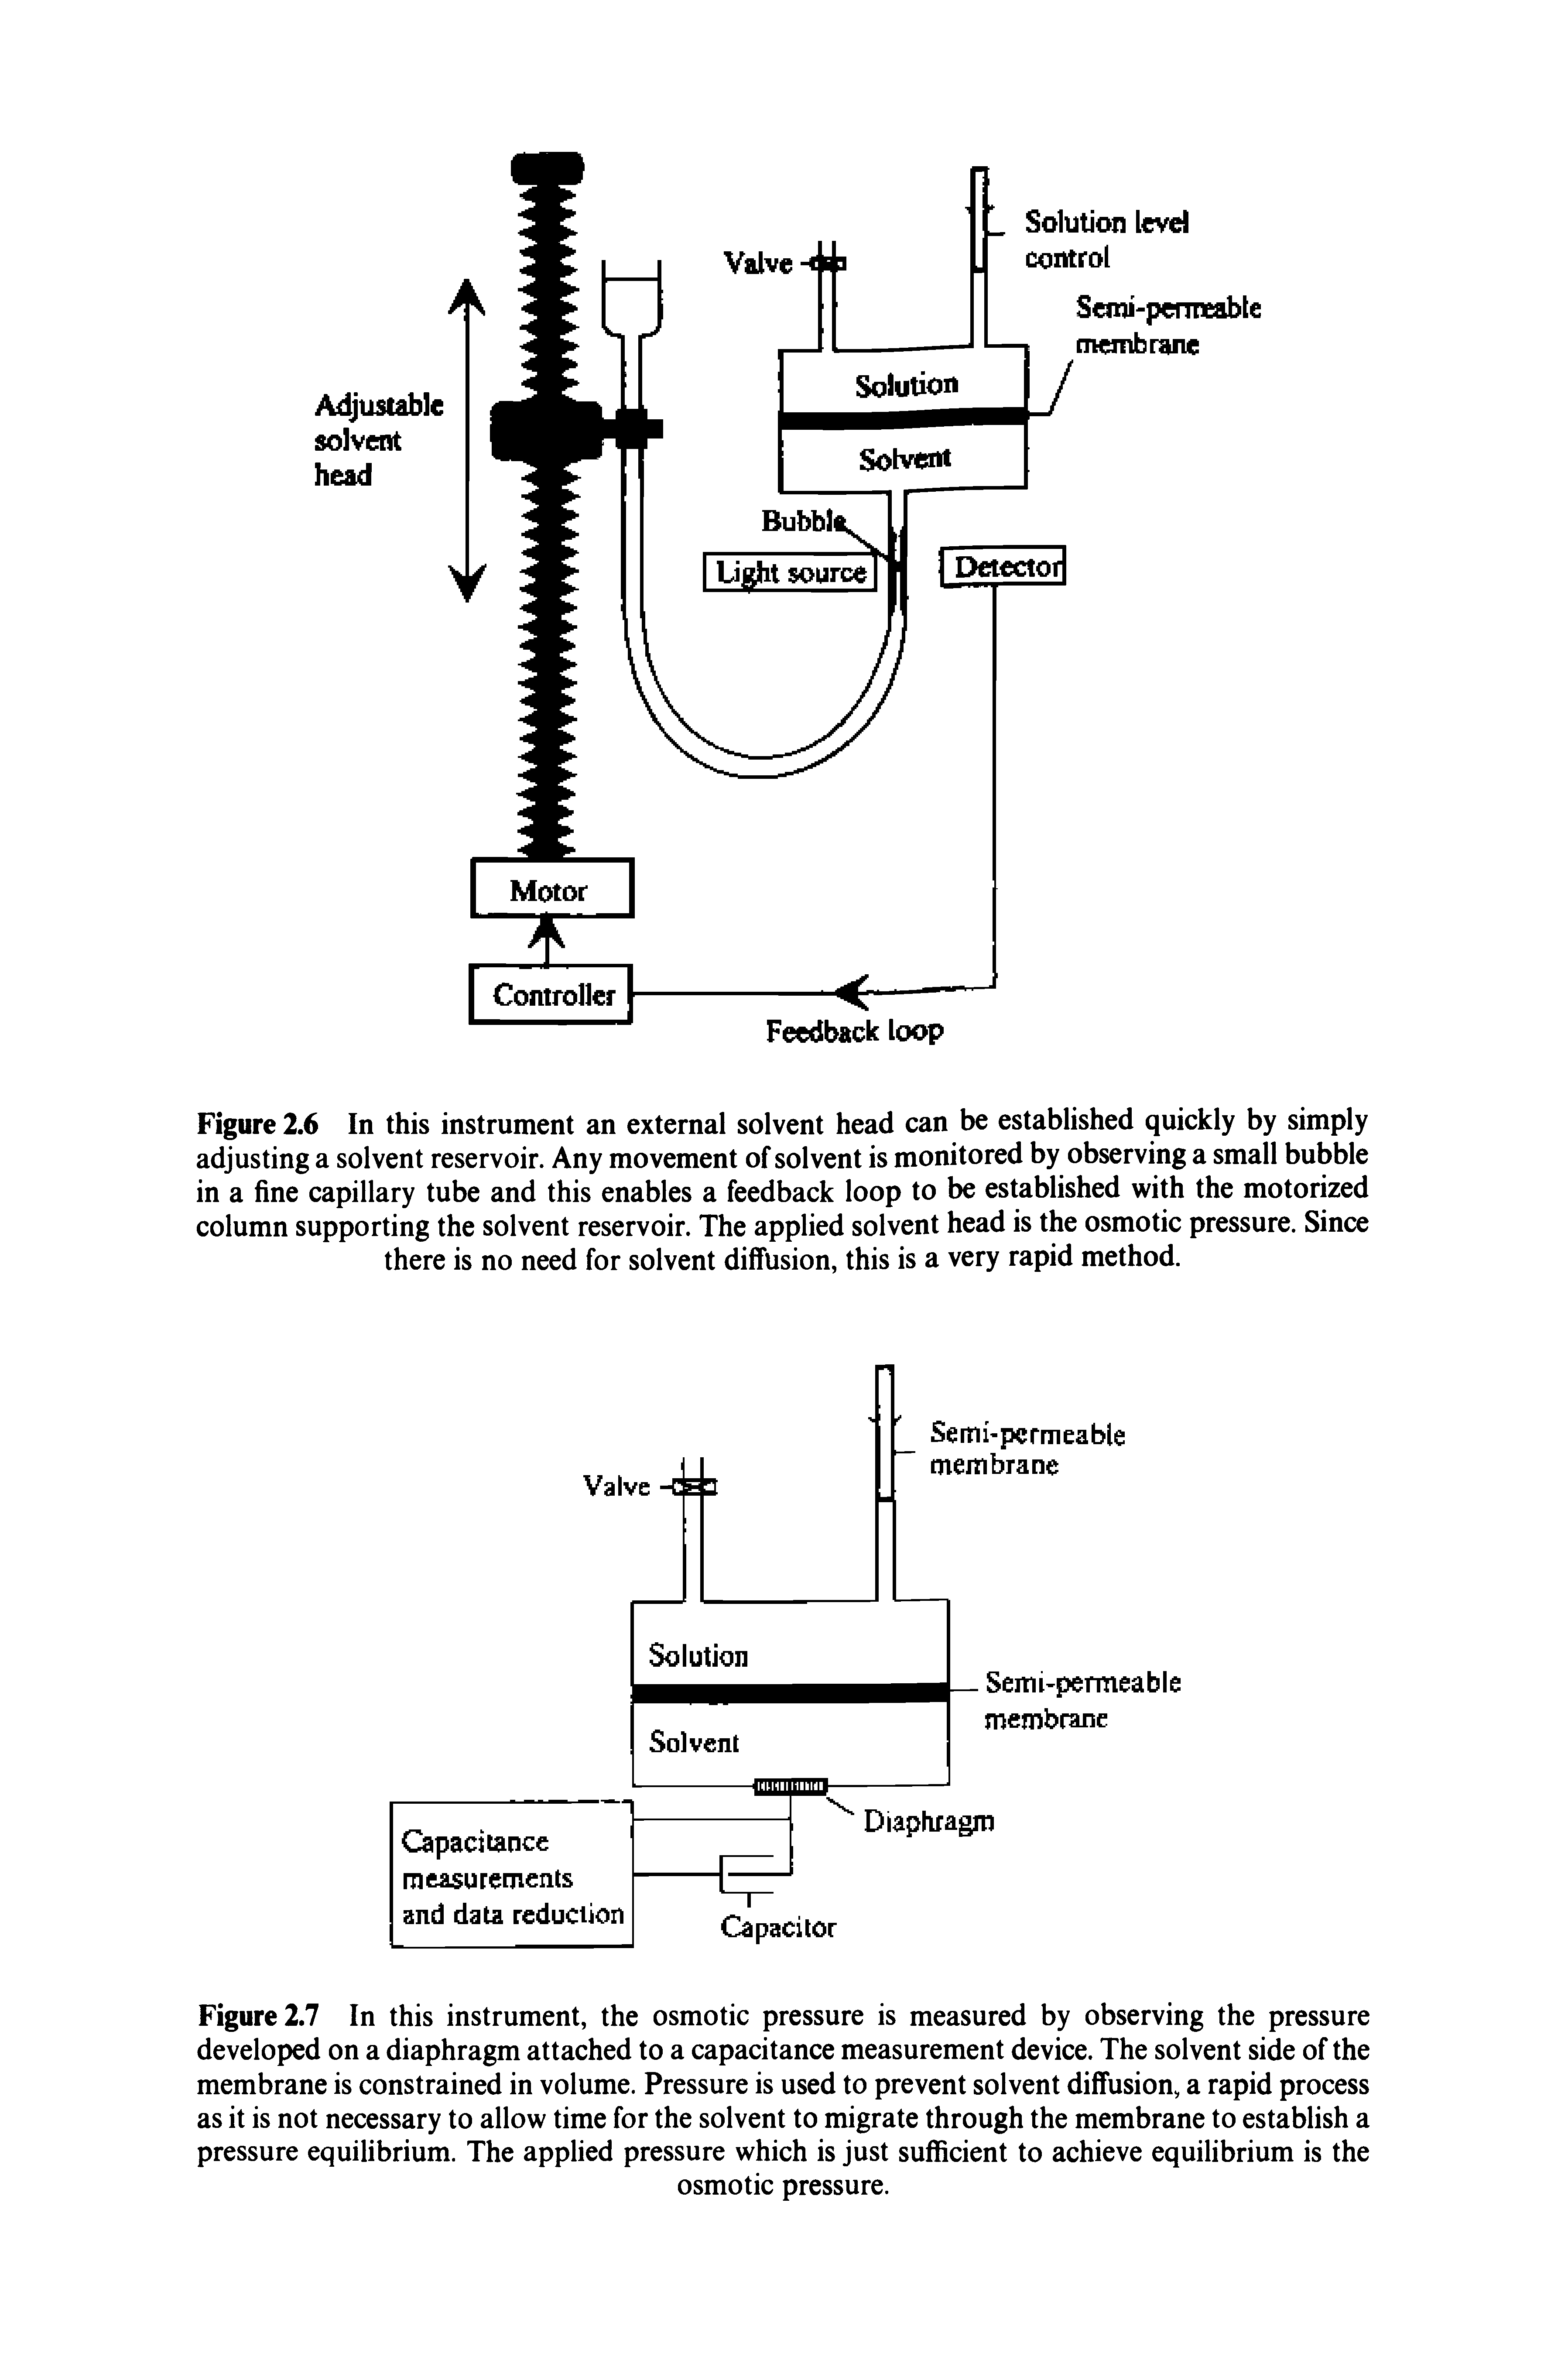 Figure 2.7 In this instrument, the osmotic pressure is measured by observing the pressure developed on a diaphragm attached to a capacitance measurement device. The solvent side of the membrane is constrained in volume. Pressure is used to prevent solvent diffusion, a rapid process as it is not necessary to allow time for the solvent to migrate through the membrane to establish a pressure equilibrium. The applied pressure which is just sufficient to achieve equilibrium is the...